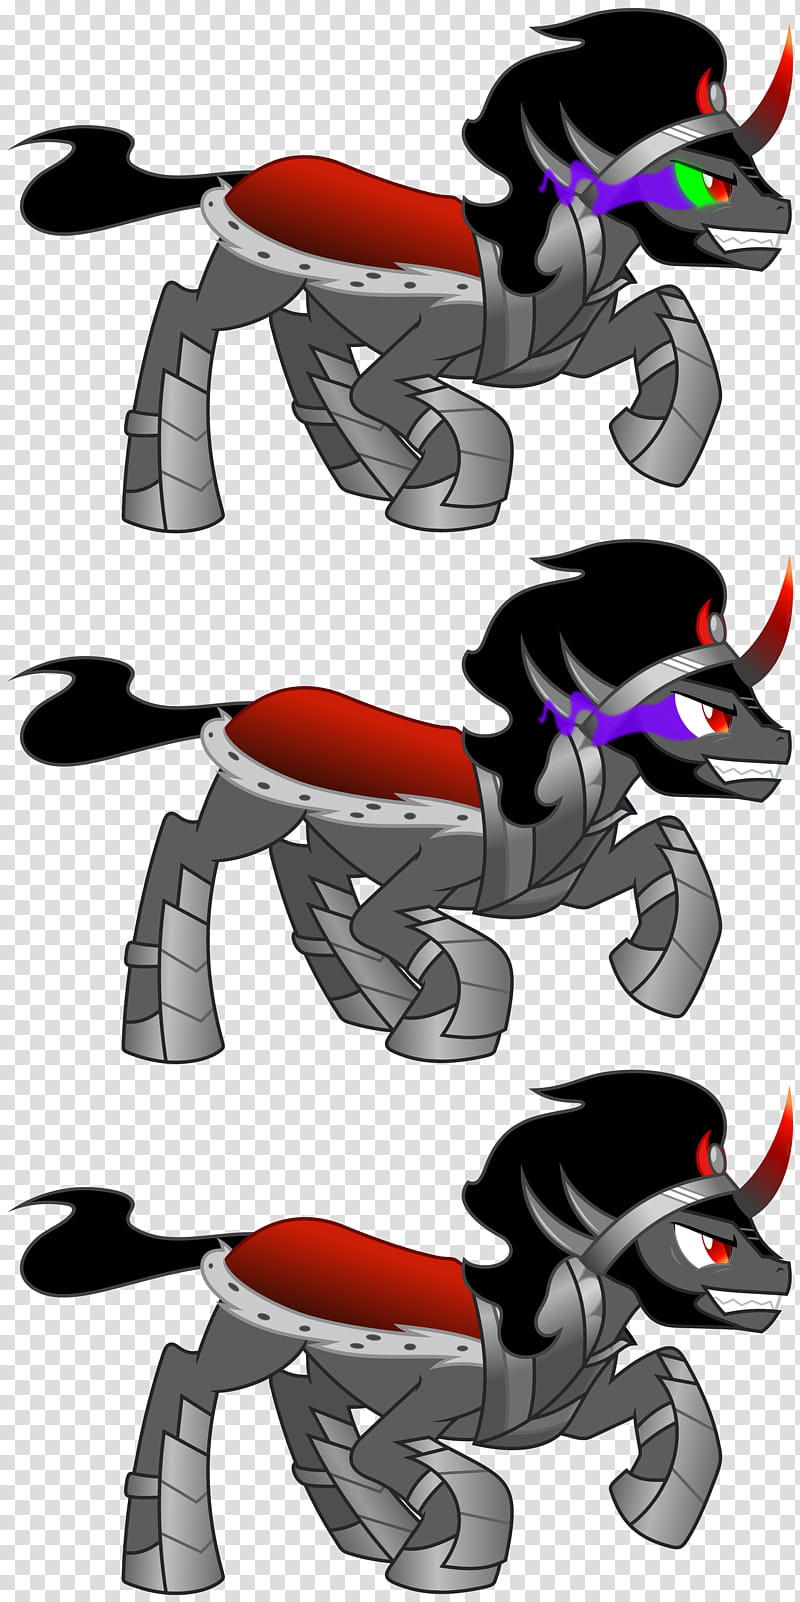 MLP Resource King Sombra , three gray-and-red animal character illustration transparent background PNG clipart